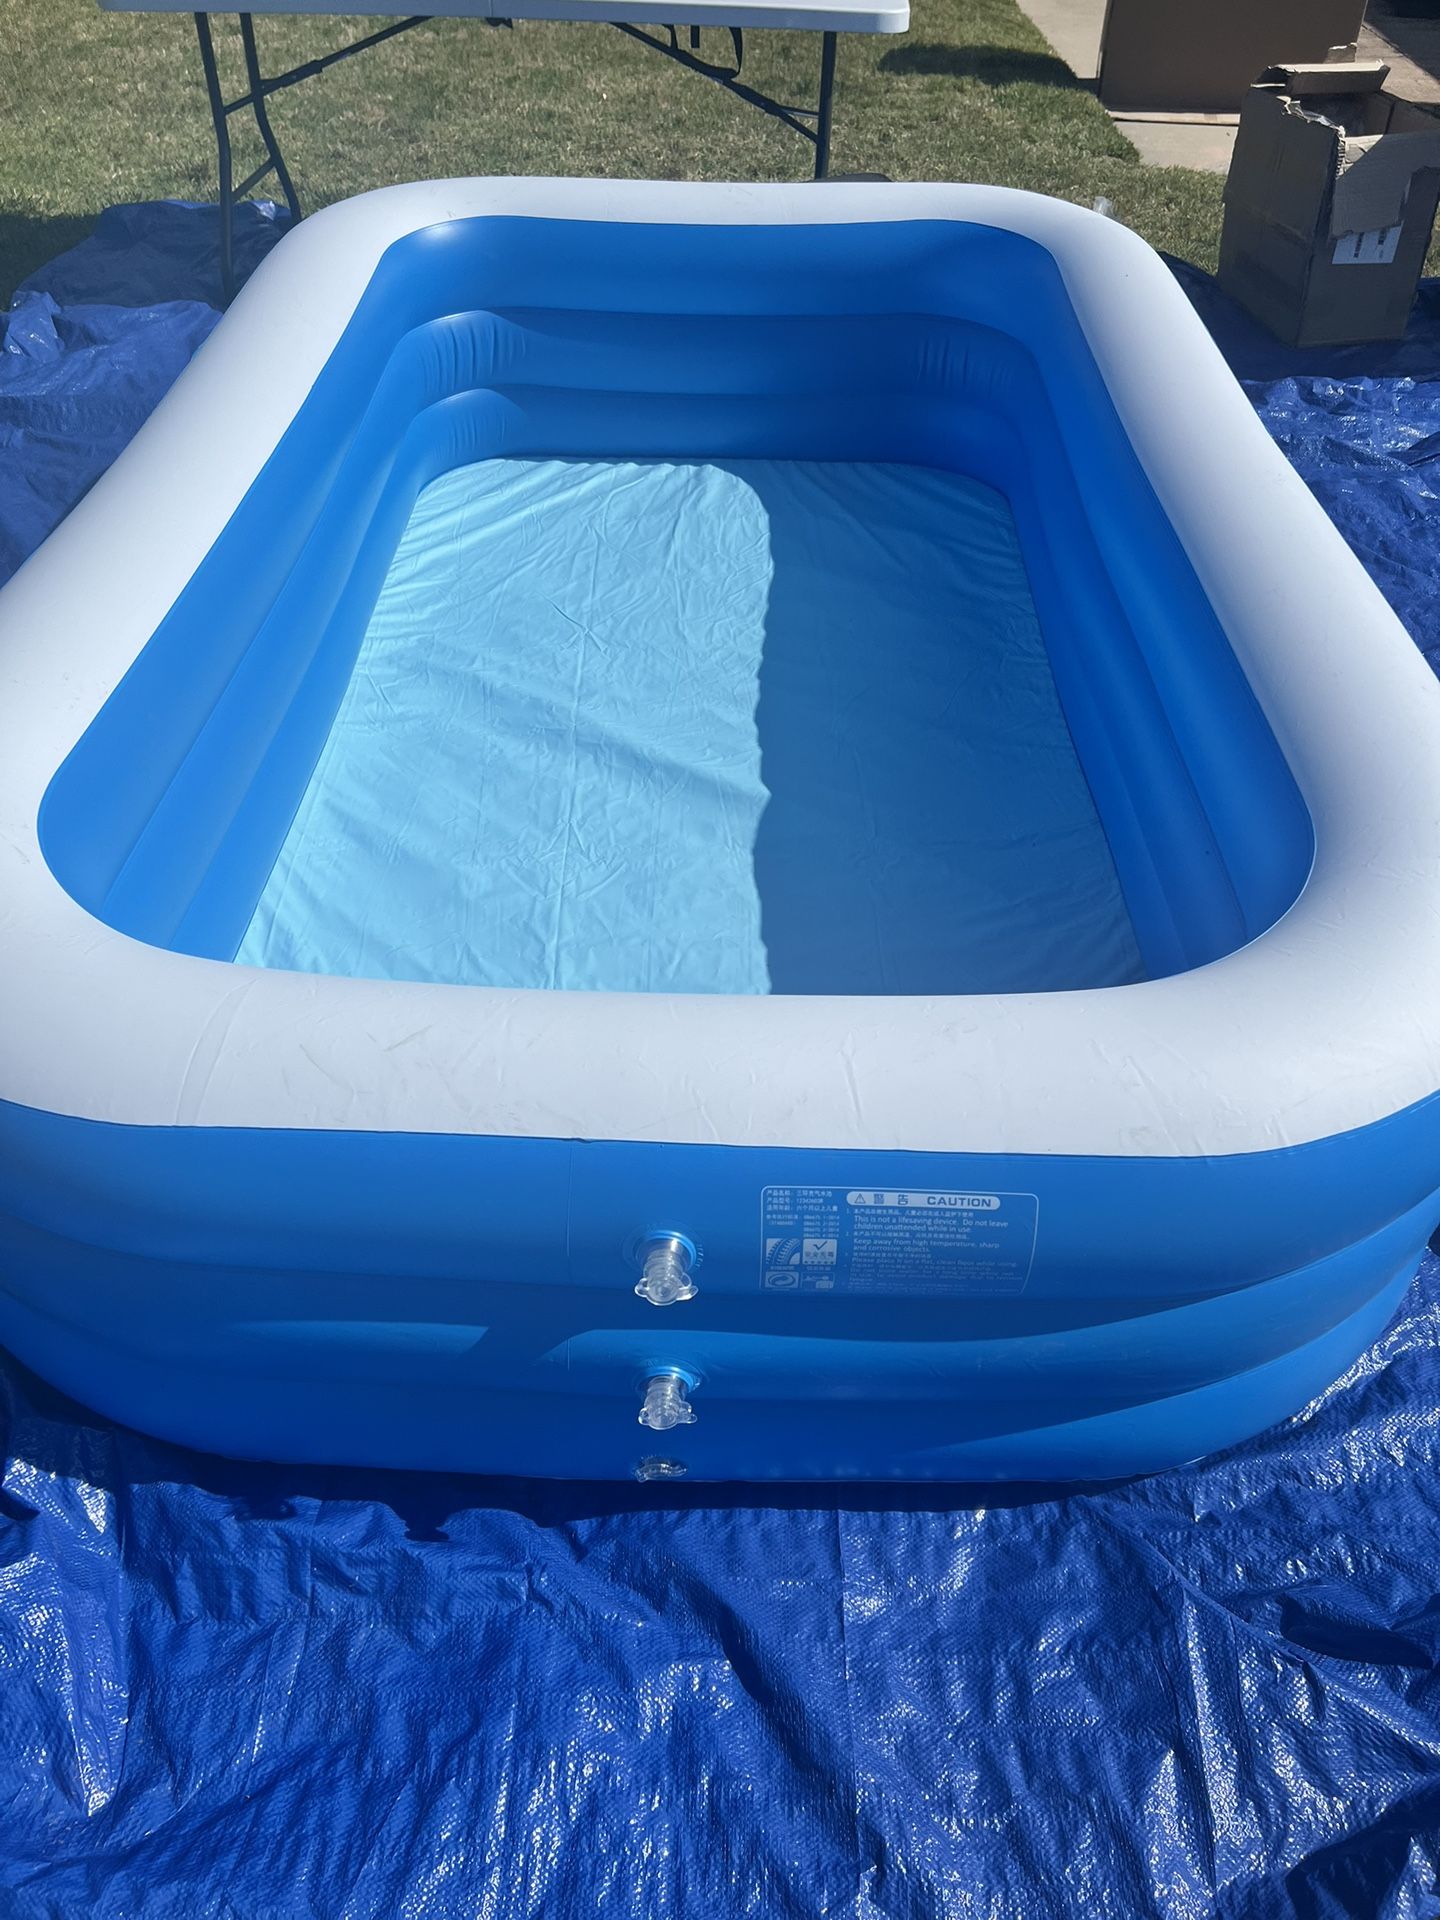 Inflatable Swimming Pool -Brand New